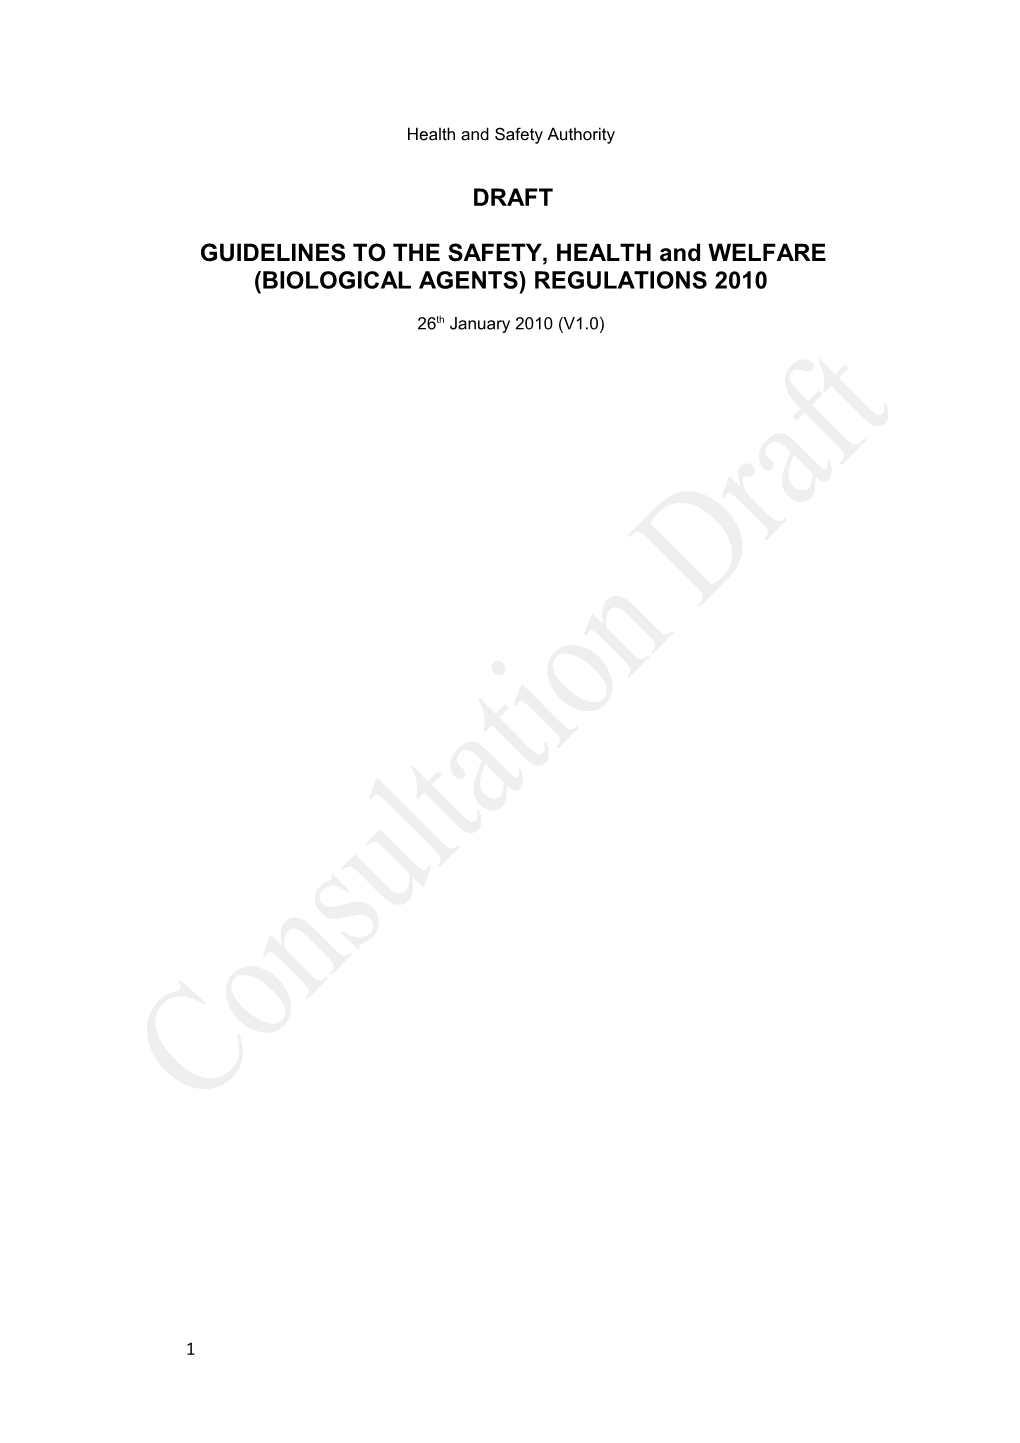 GUIDELINES to the SAFETY, HEALTH and WELFARE (BIOLOGICAL AGENTS) REGULATIONS 2010